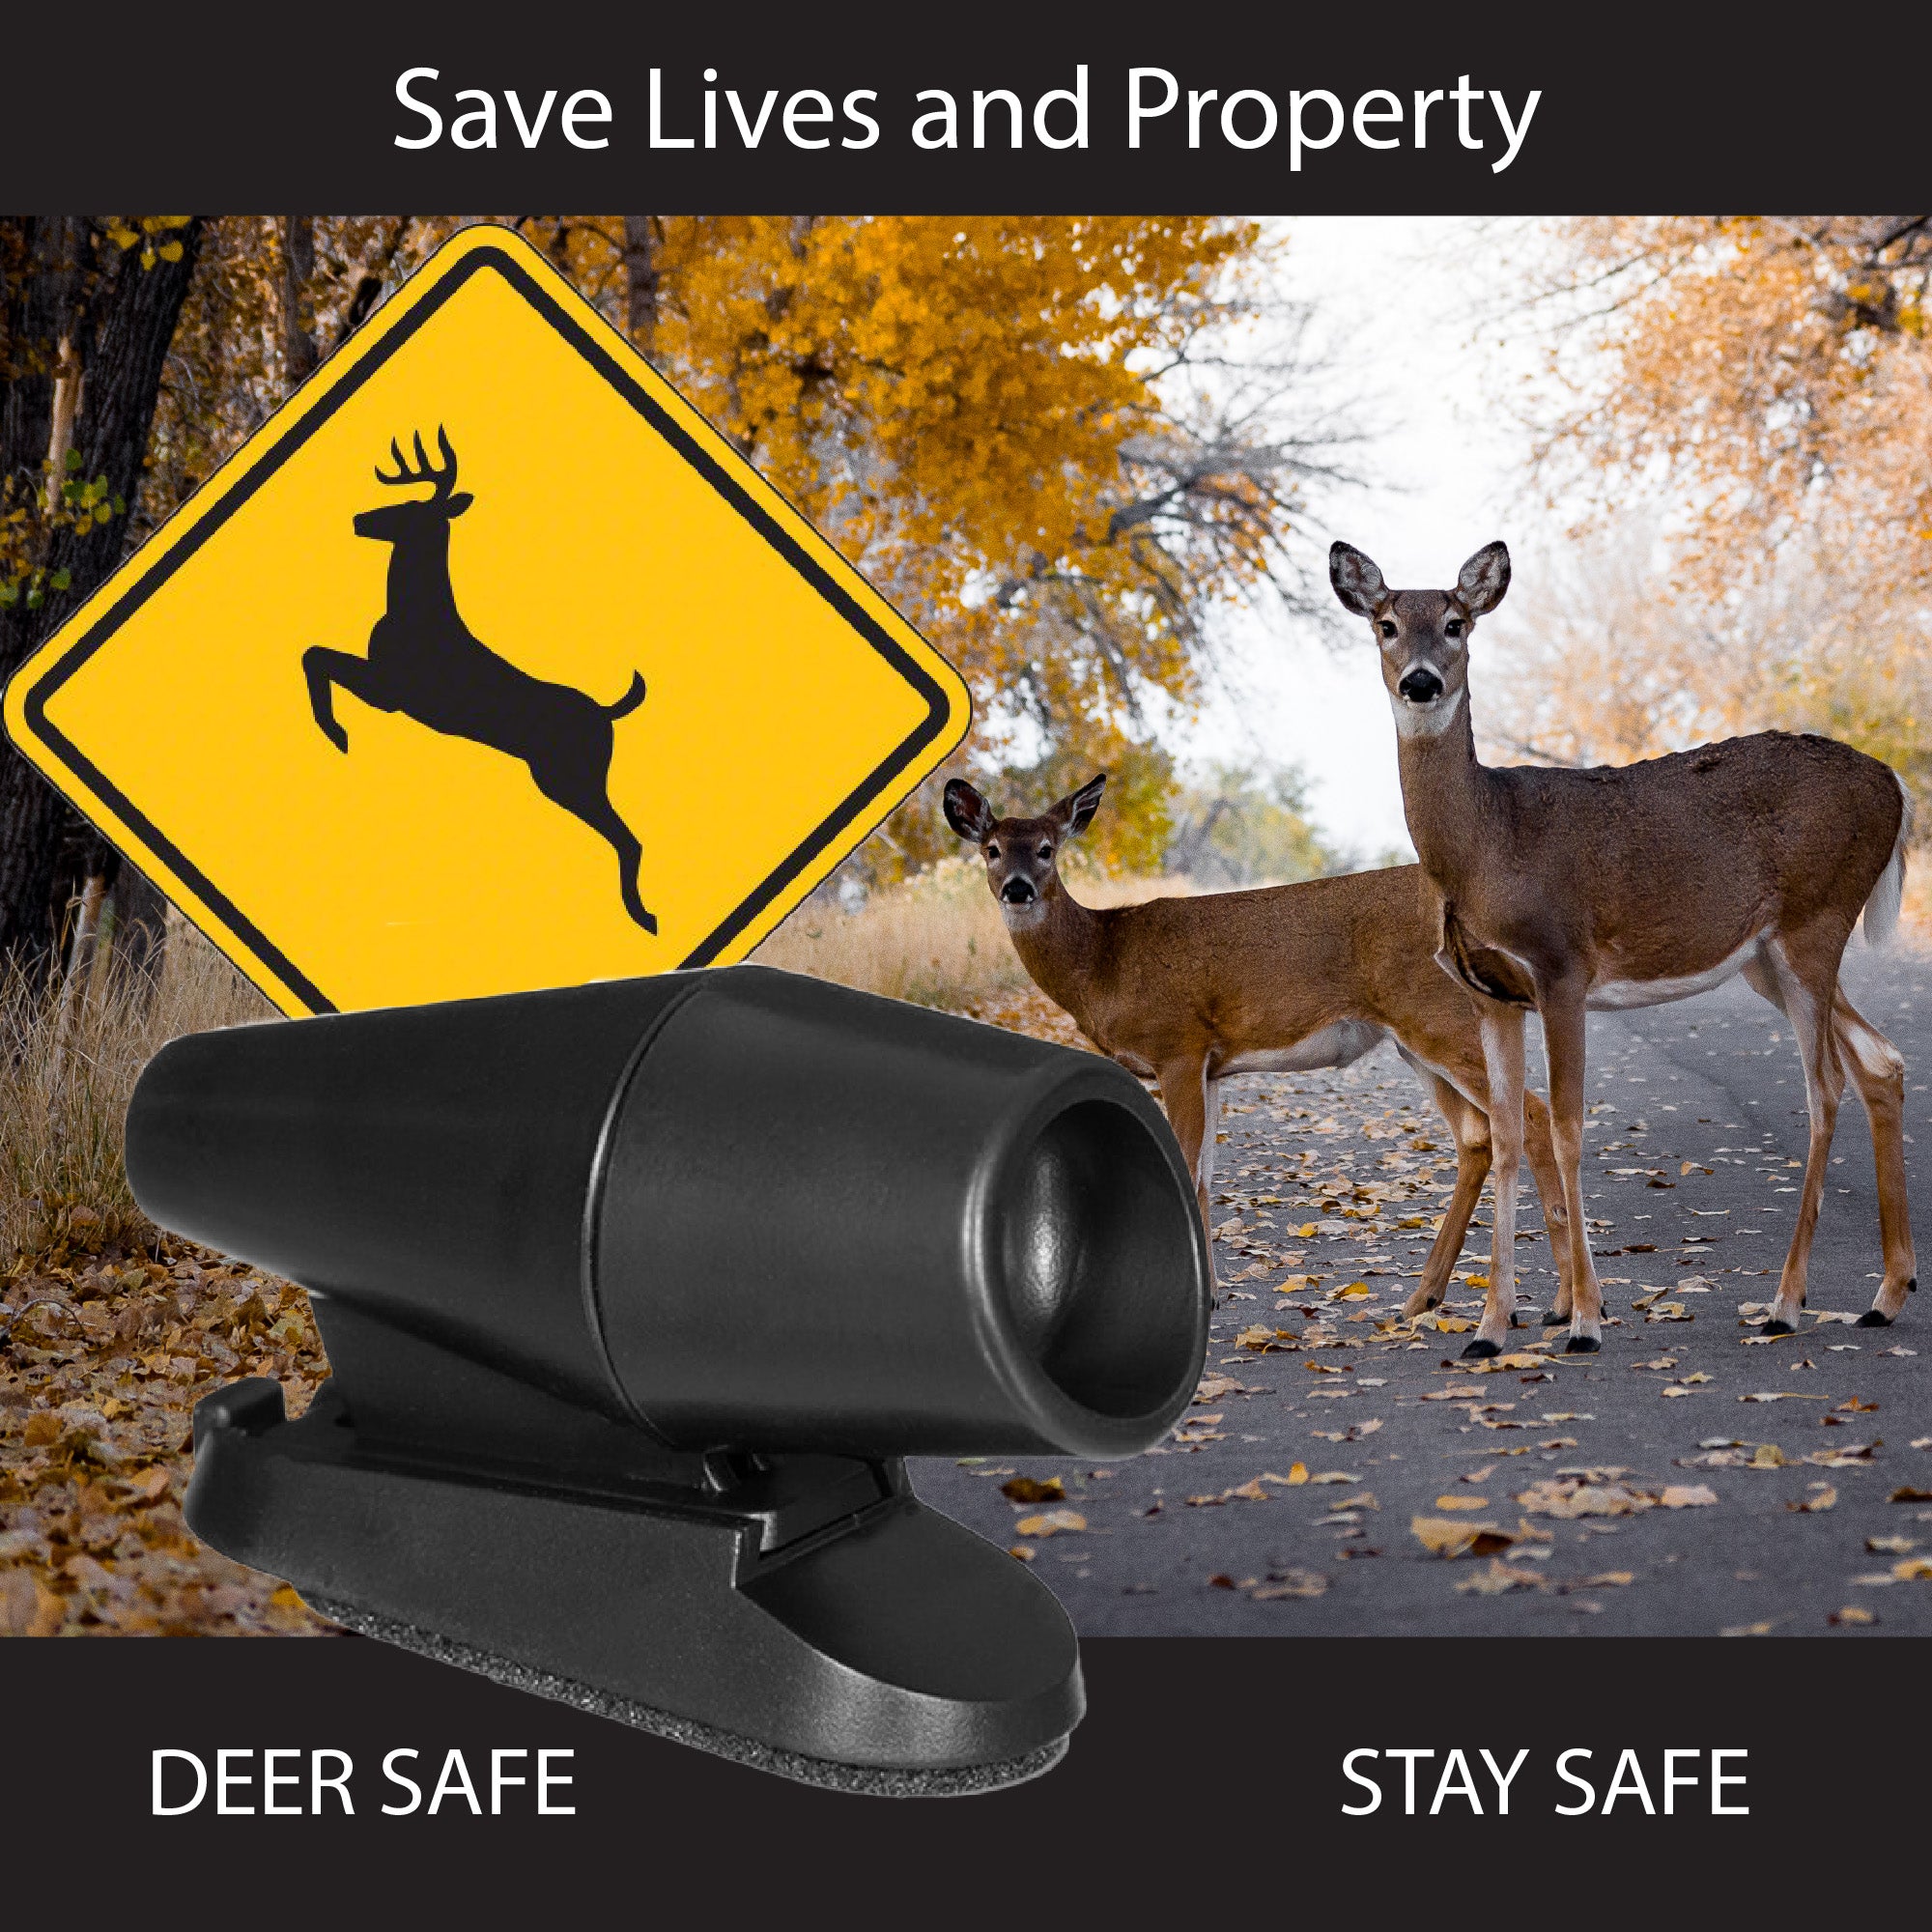 4 PIECE ULTRASONIC CAR DEER WARNING WHISTLE Auto Safety Save